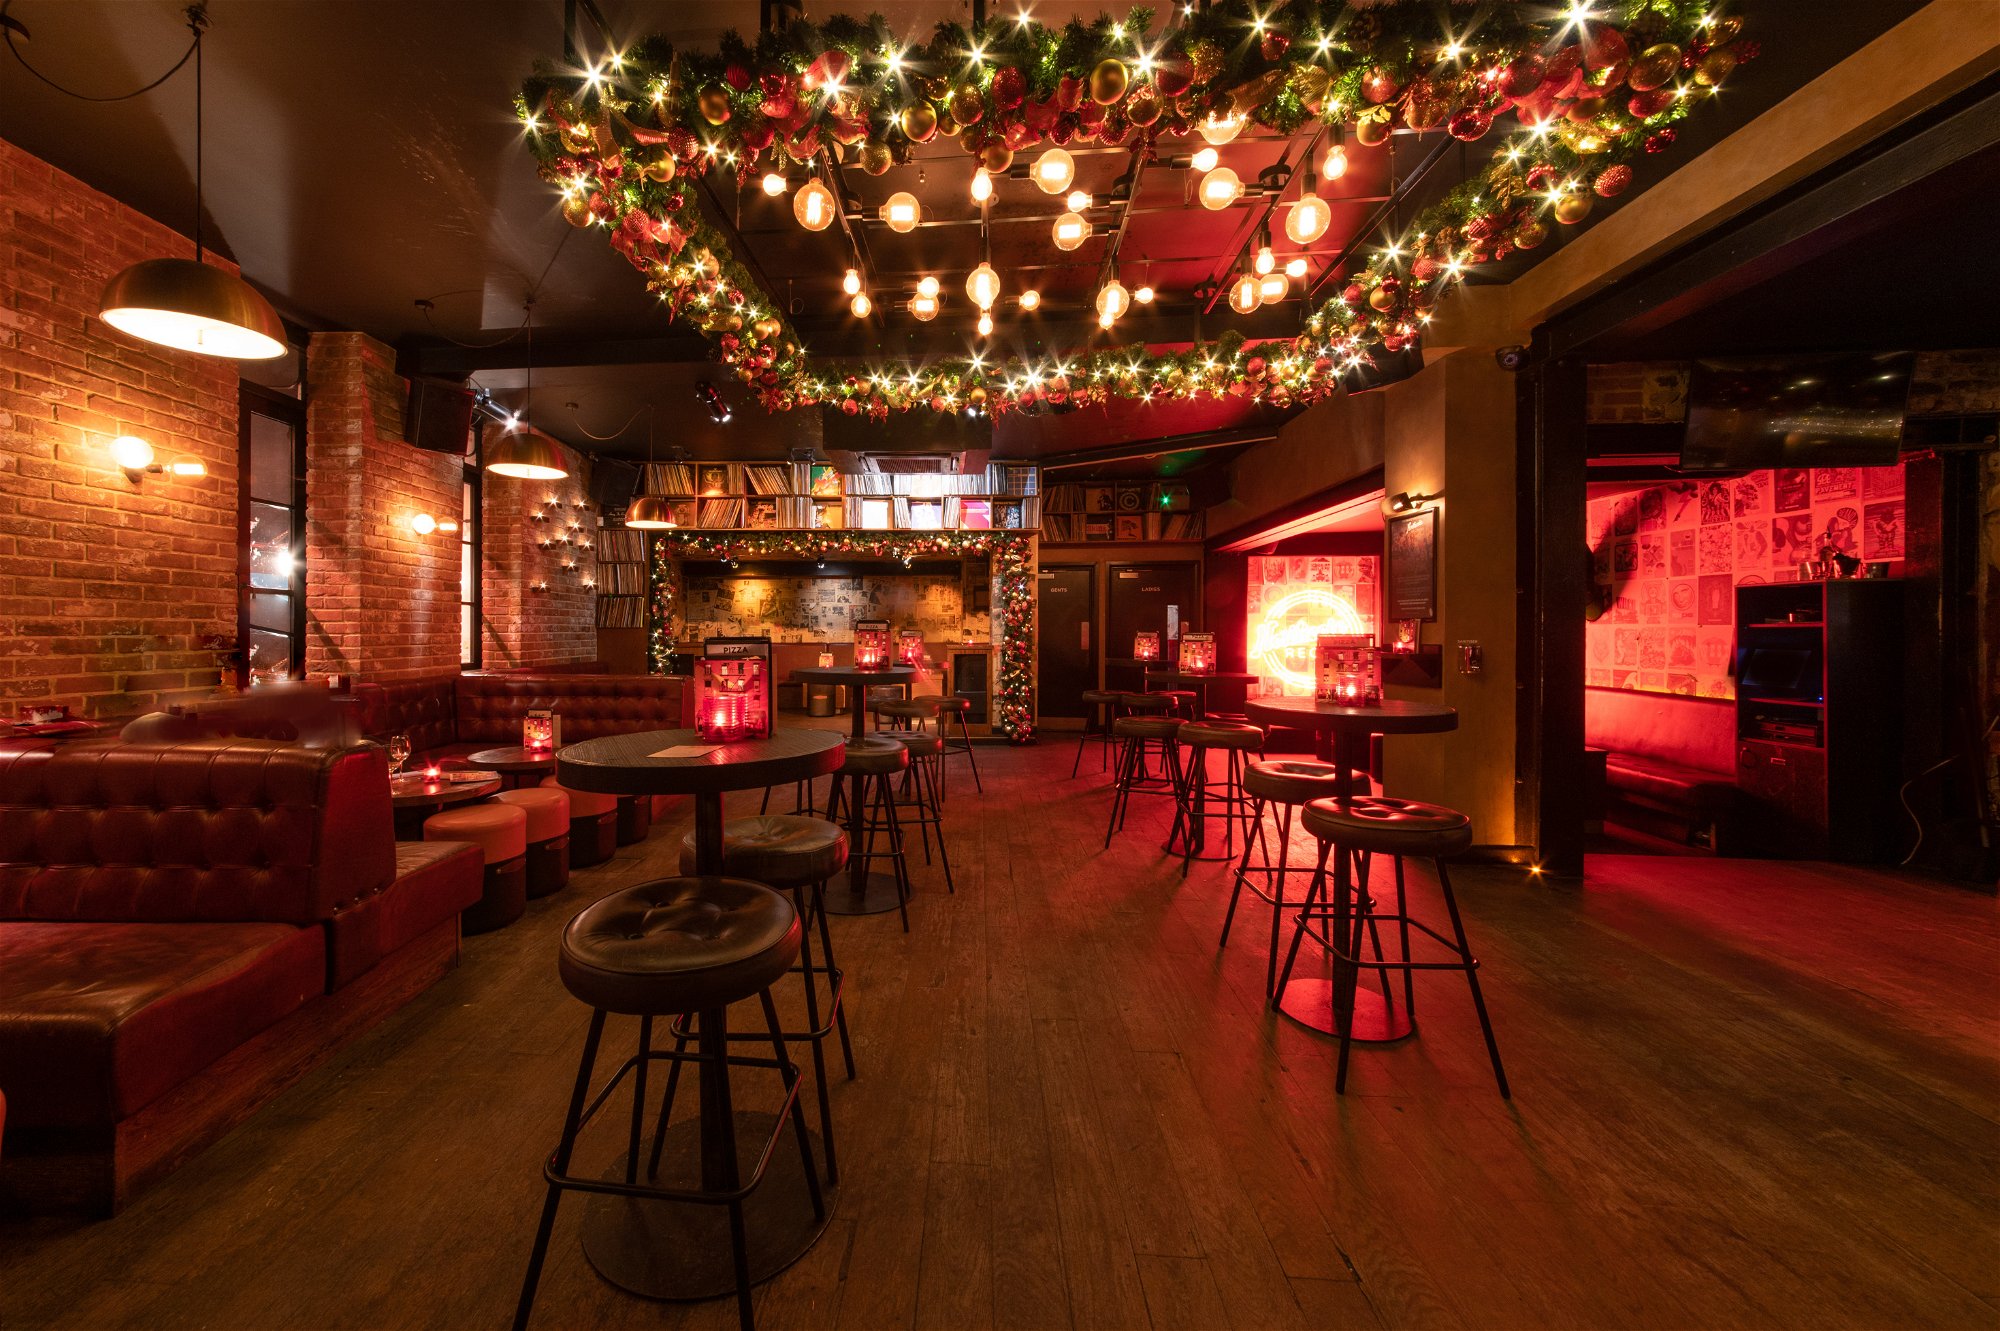 Venue available for Christmas parties in Battersea, South West London.